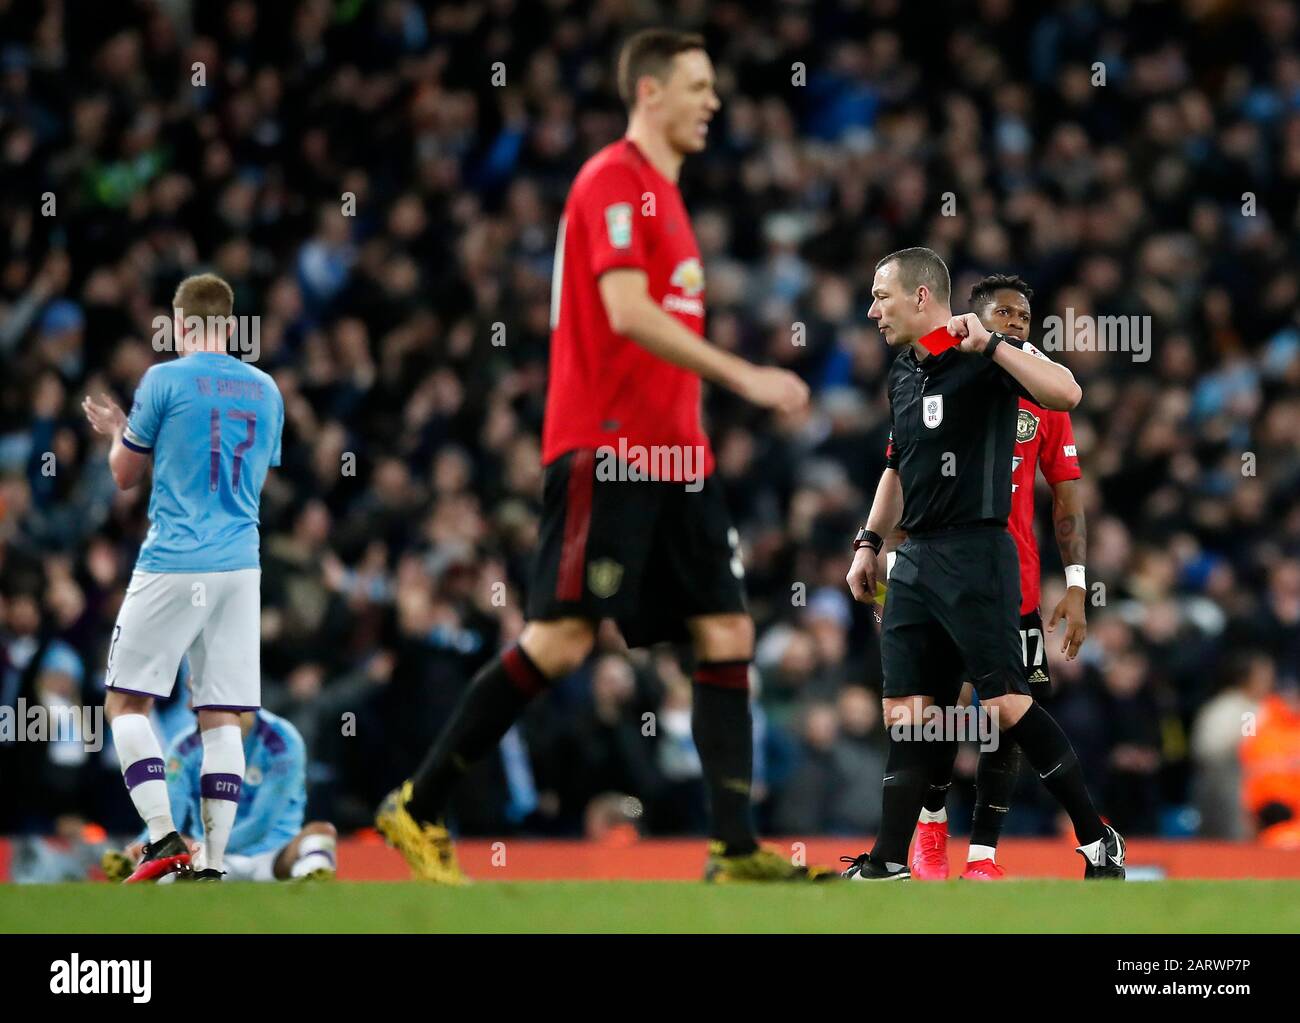 Referee Kevin Friend shows a red card to Manchester United's Nemanja Matic (centre) after receiving a yellow card for a foul during the Carabao Cup Semi Final, second leg match at